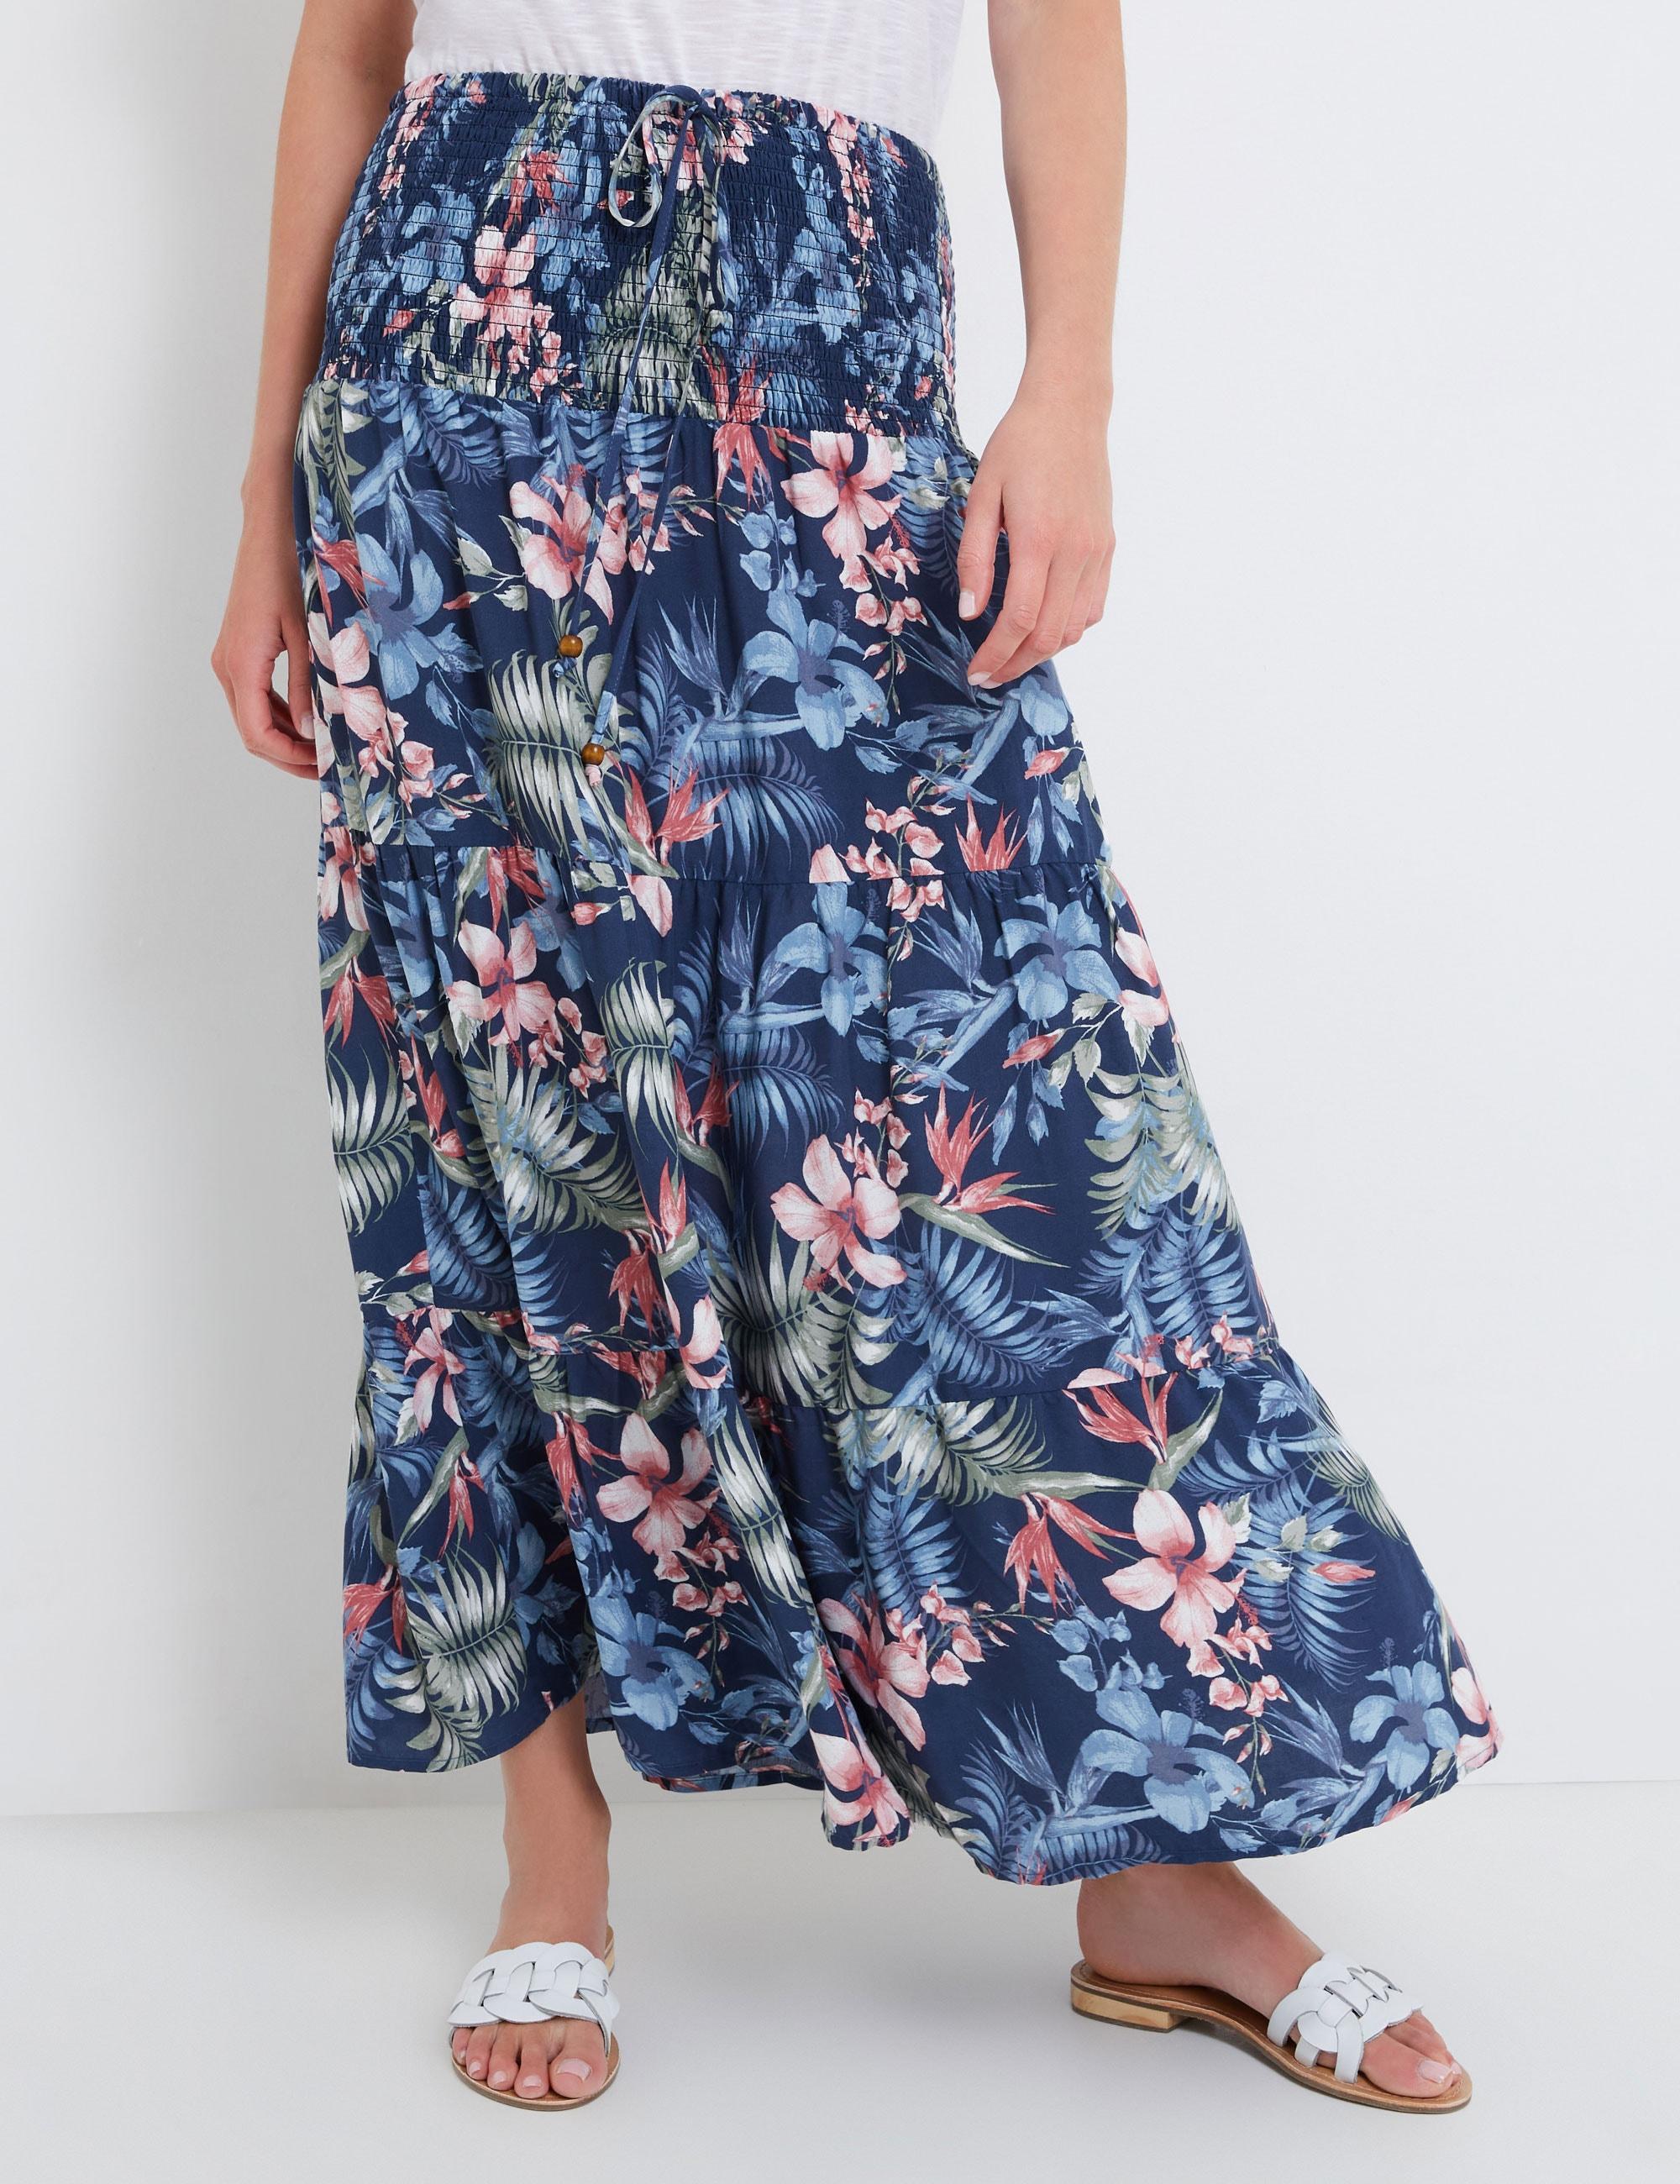 RIVERS - Womens Skirts - Maxi - Summer - Blue - Floral - Smart Casual Fashion - Ocean Breeze - Oversized - 2 In 1 - Long - Work Clothes - Office Wear